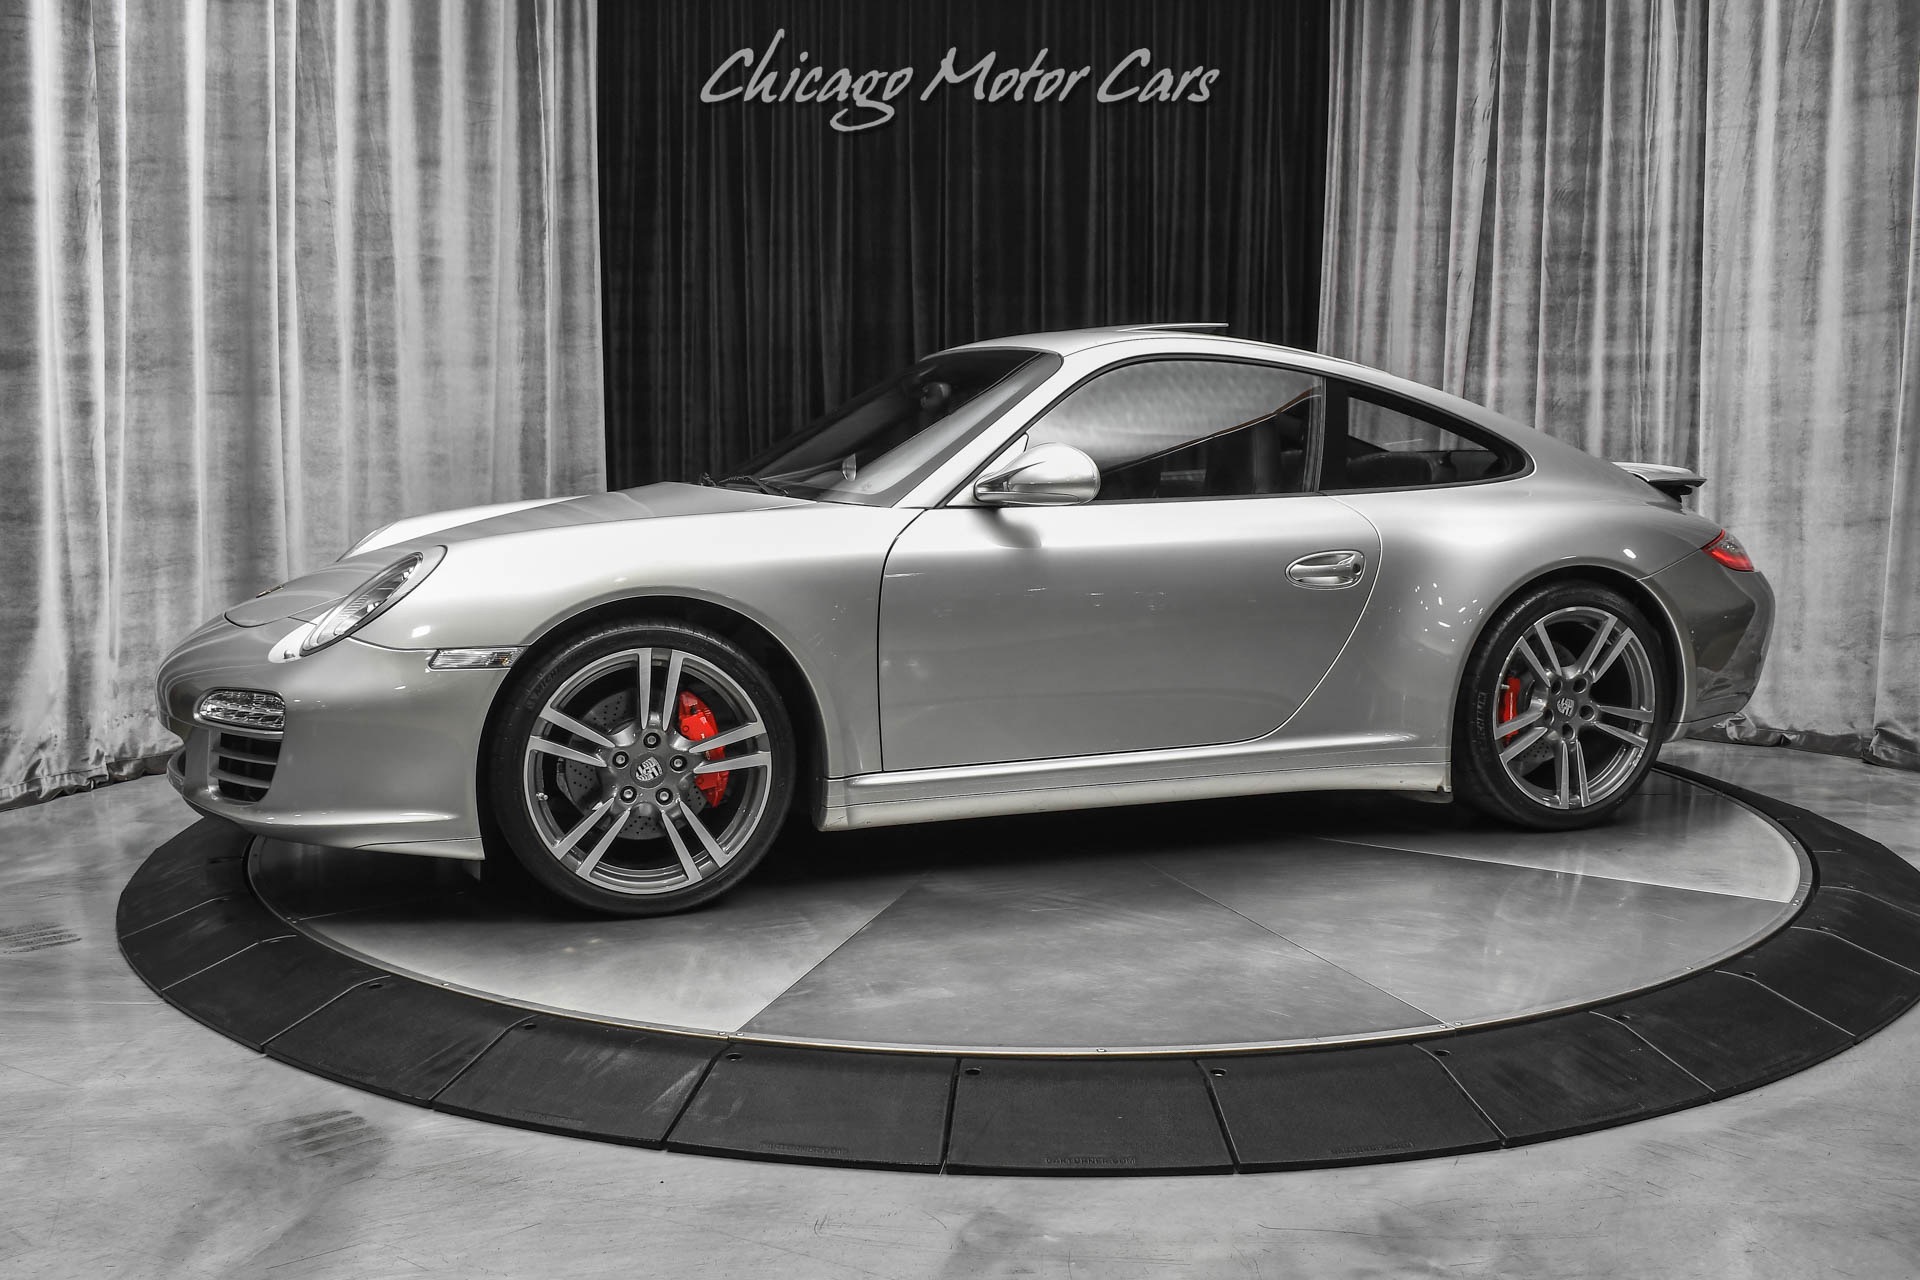 Used 2011 Porsche 911 Carrera 4S Coupe LOW Miles! Comfort Pkg! Sport  Exhaust! LOADED! For Sale ($86,800) | Chicago Motor Cars Stock #19604